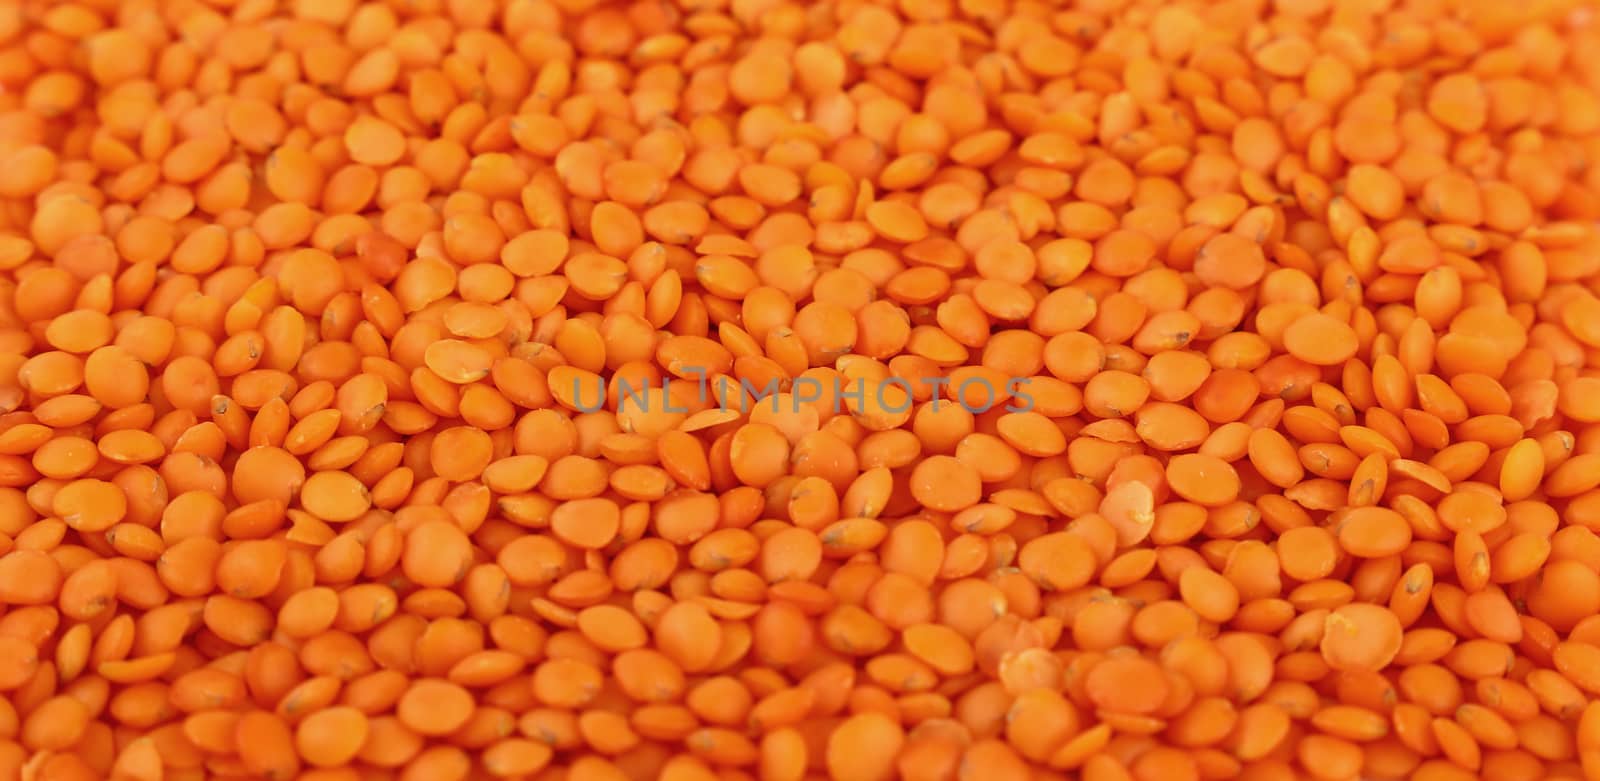 Orange Masoor Dal (Red Chief) lentil lens close up pattern background, high angle view, selective focus